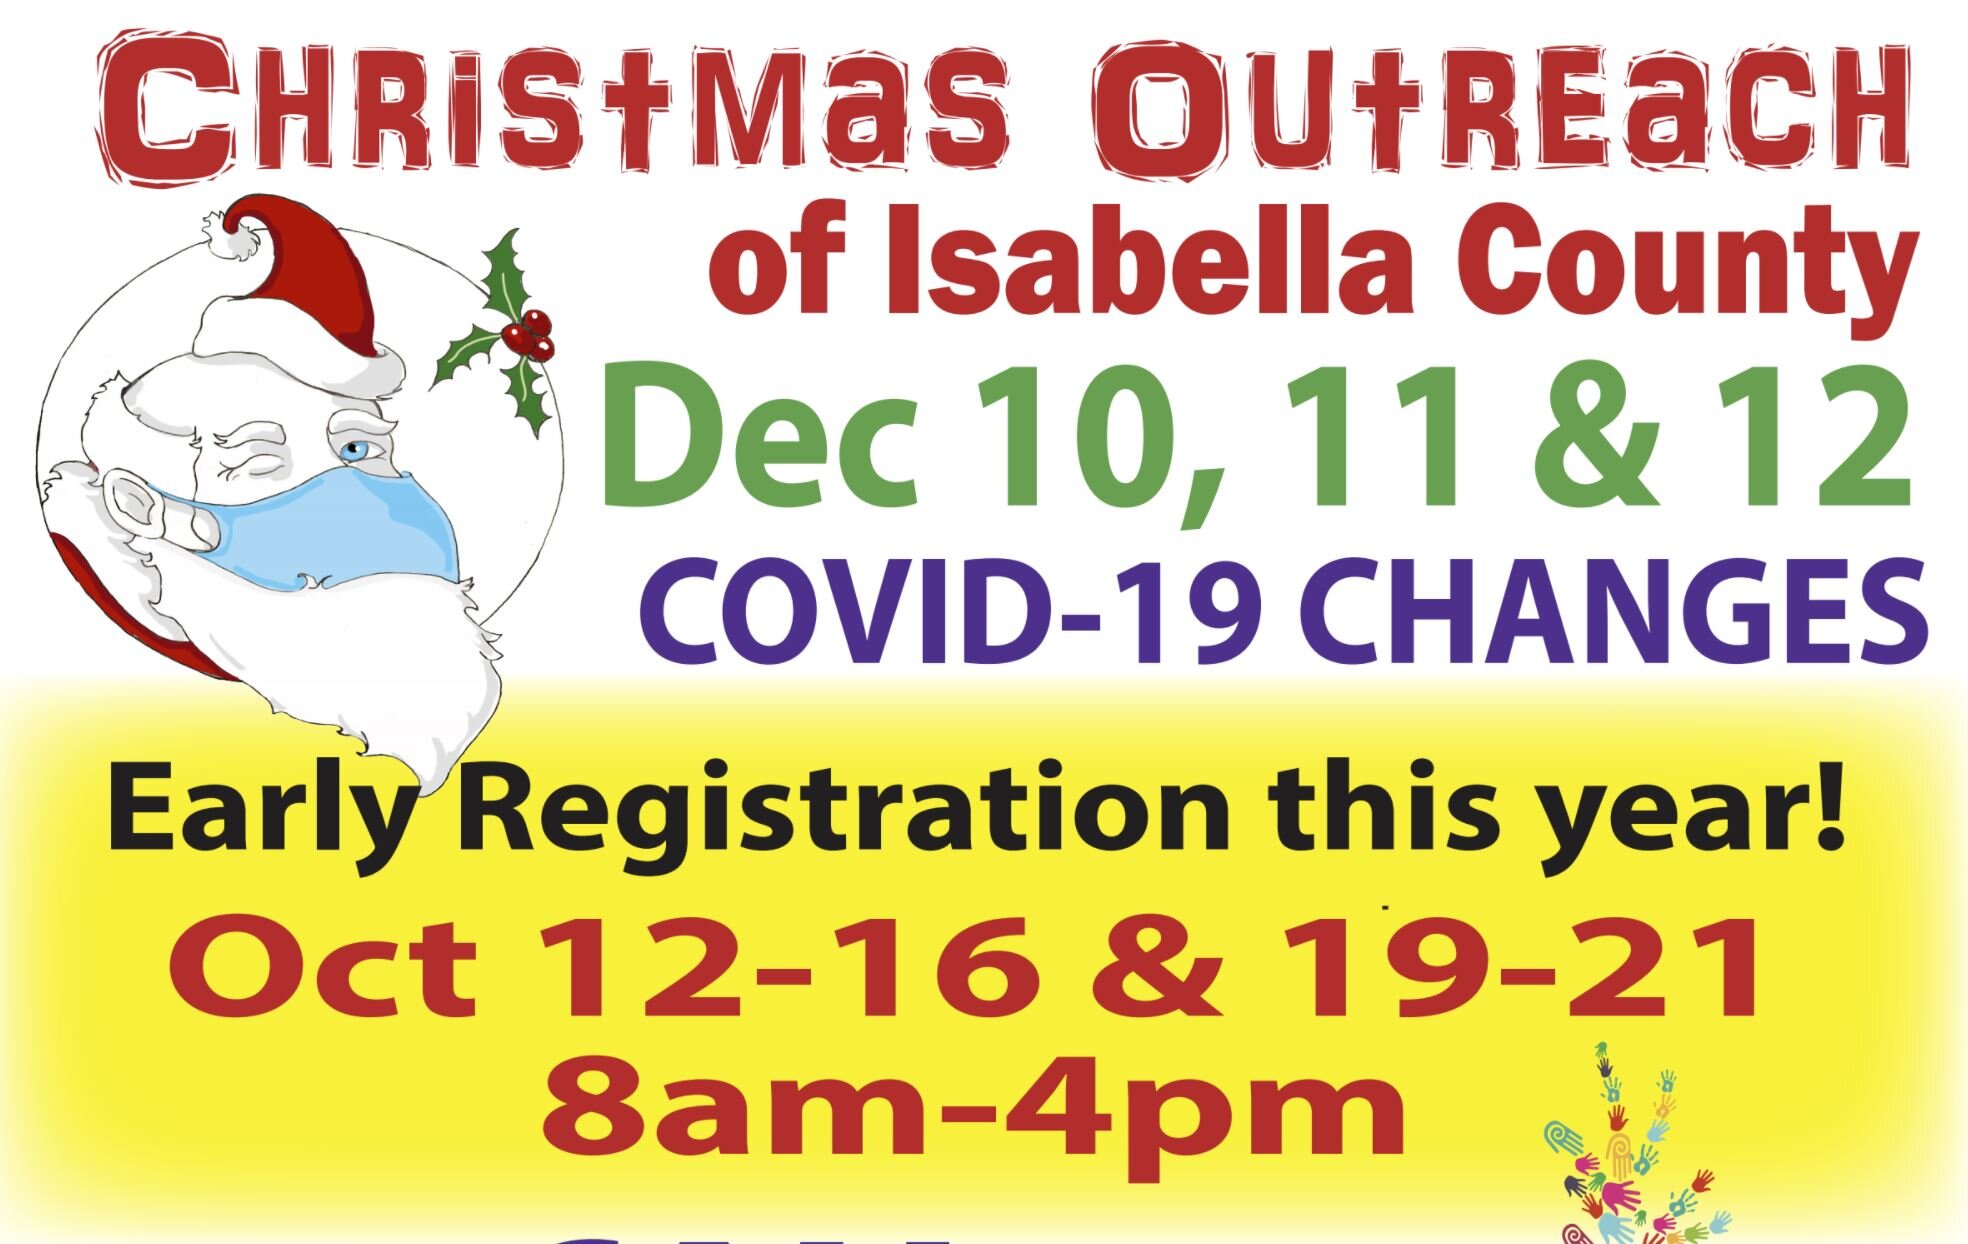 Registration for Christmas Outreach is earlier than usual this year, and the even will look a little different than it has in the past.